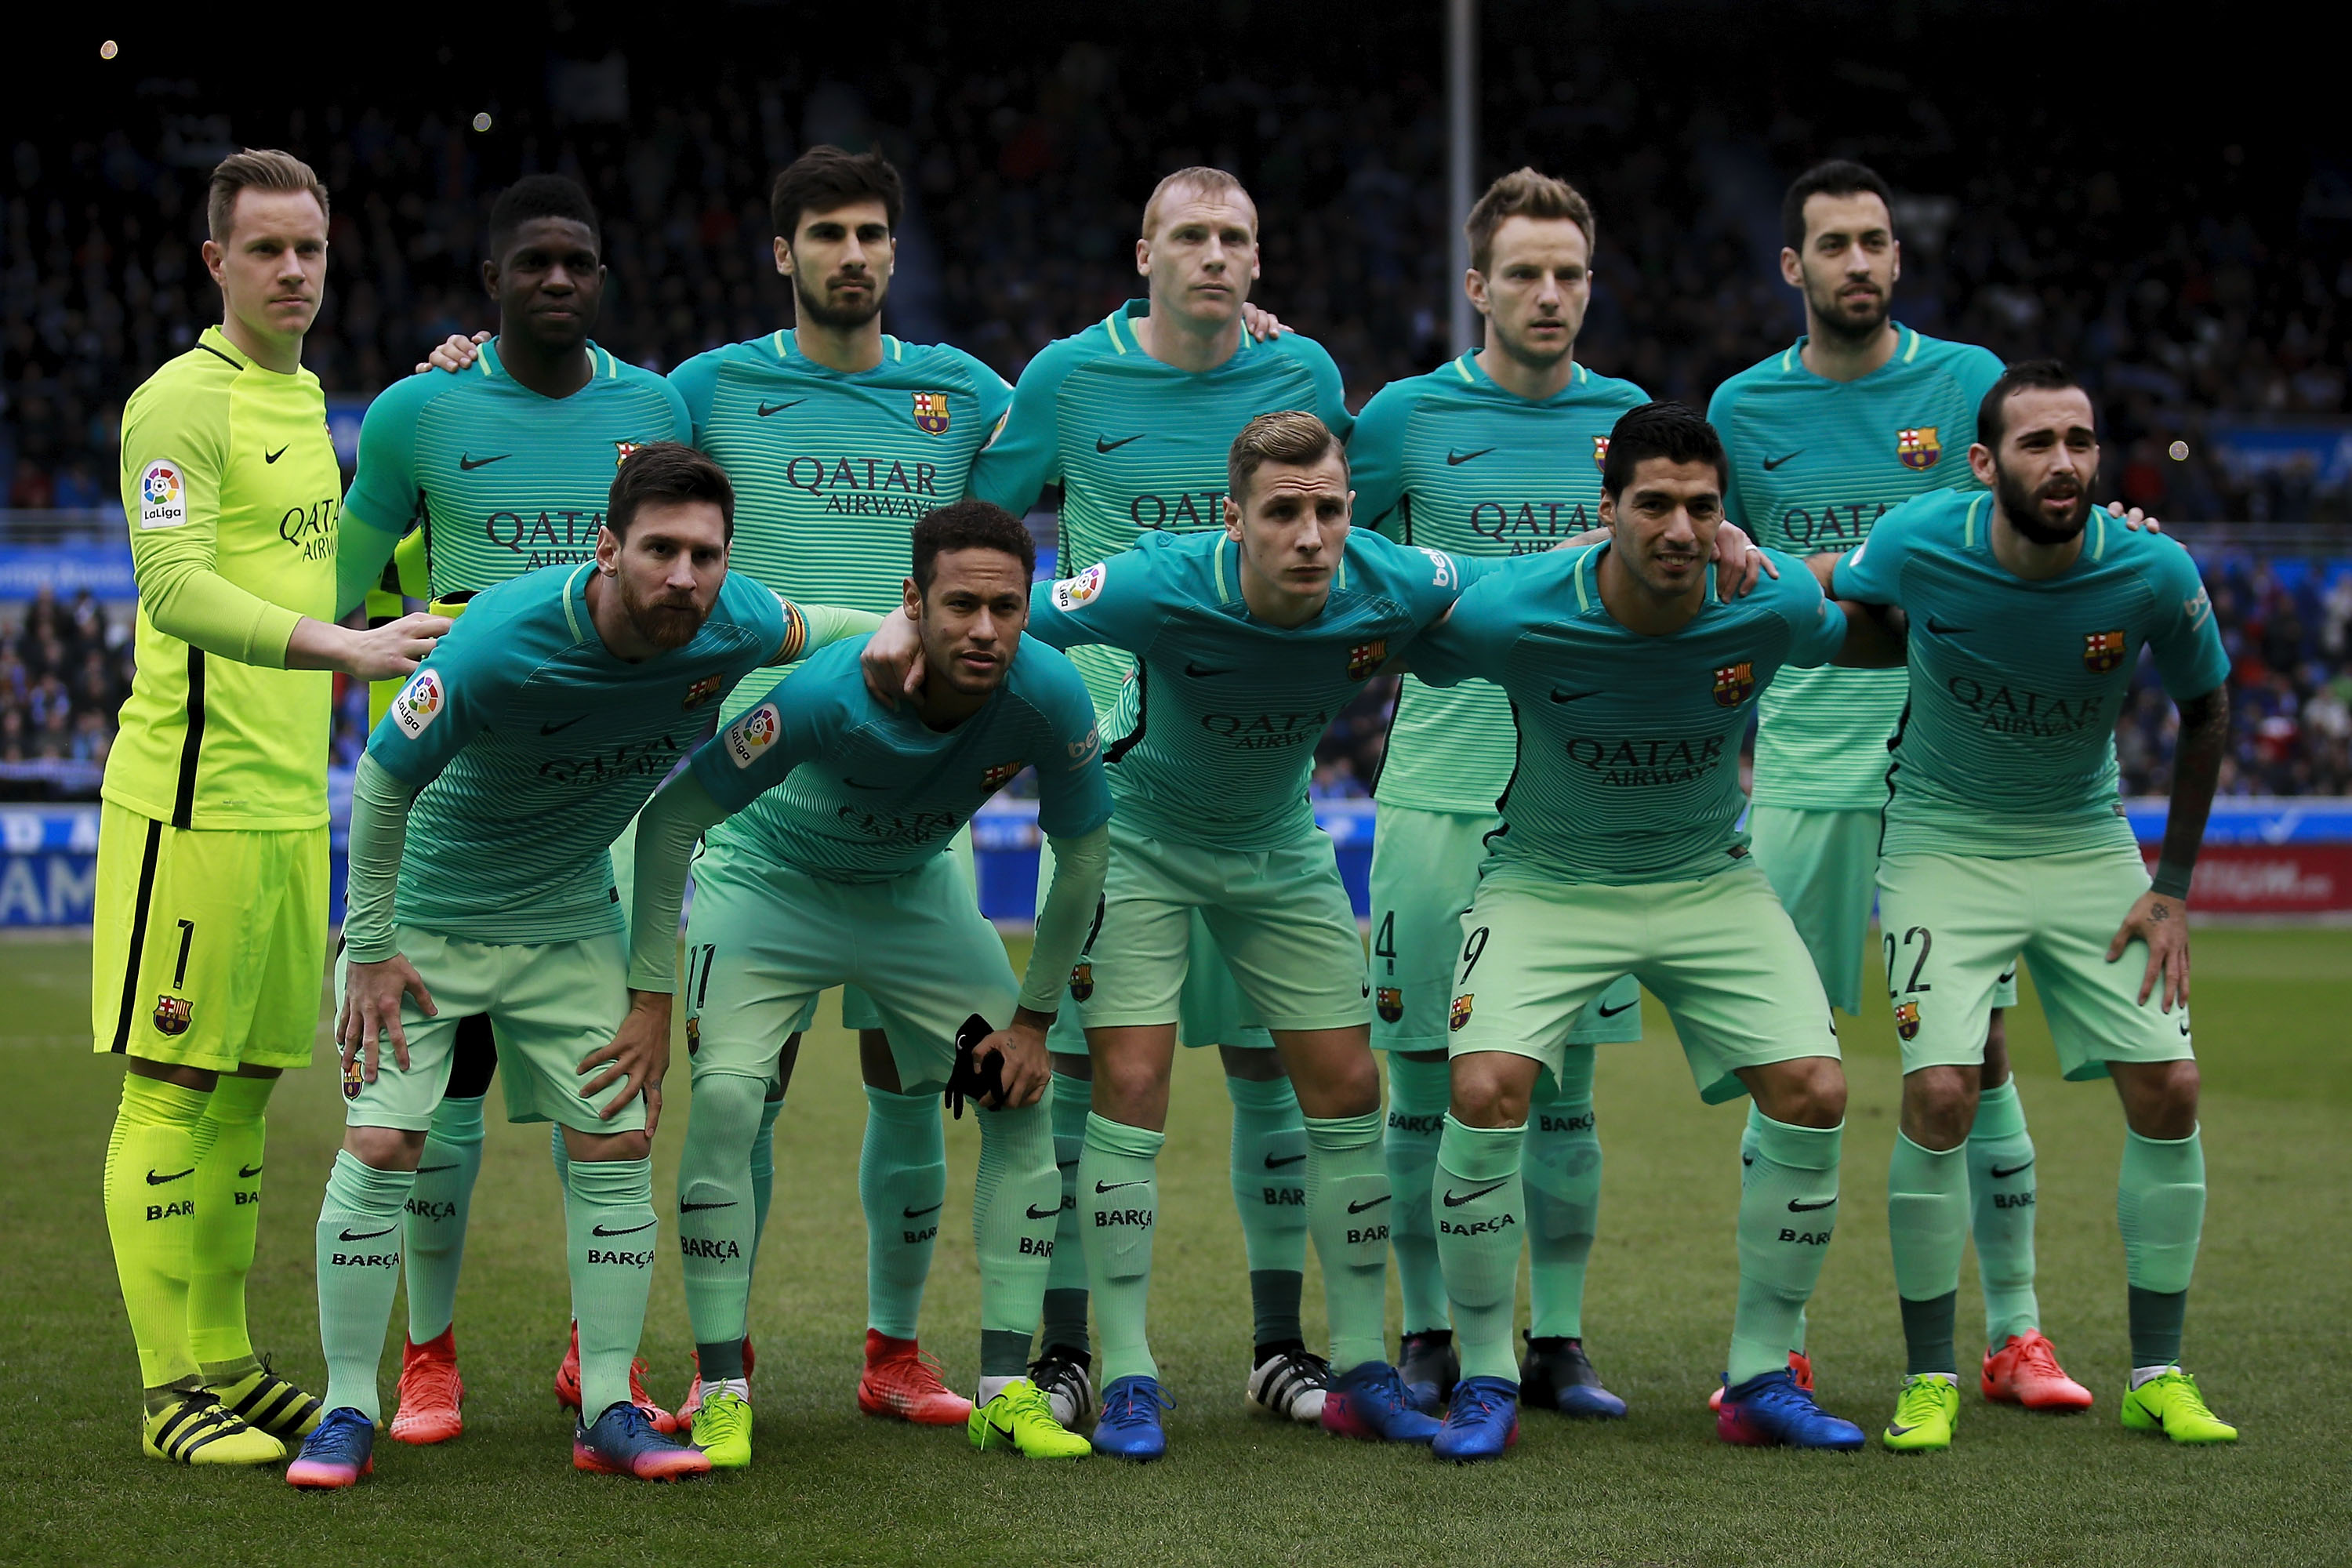 VITORIA-GASTEIZ, SPAIN - FEBRUARY 11:  FC Barcelona line up prior to start the La Liga match between Deportivo Alaves and FC Barcelona at Estadio de Mendizorroza on February 11, 2017 in Vitoria-Gasteiz, Spain.  (Photo by Gonzalo Arroyo Moreno/Getty Images)